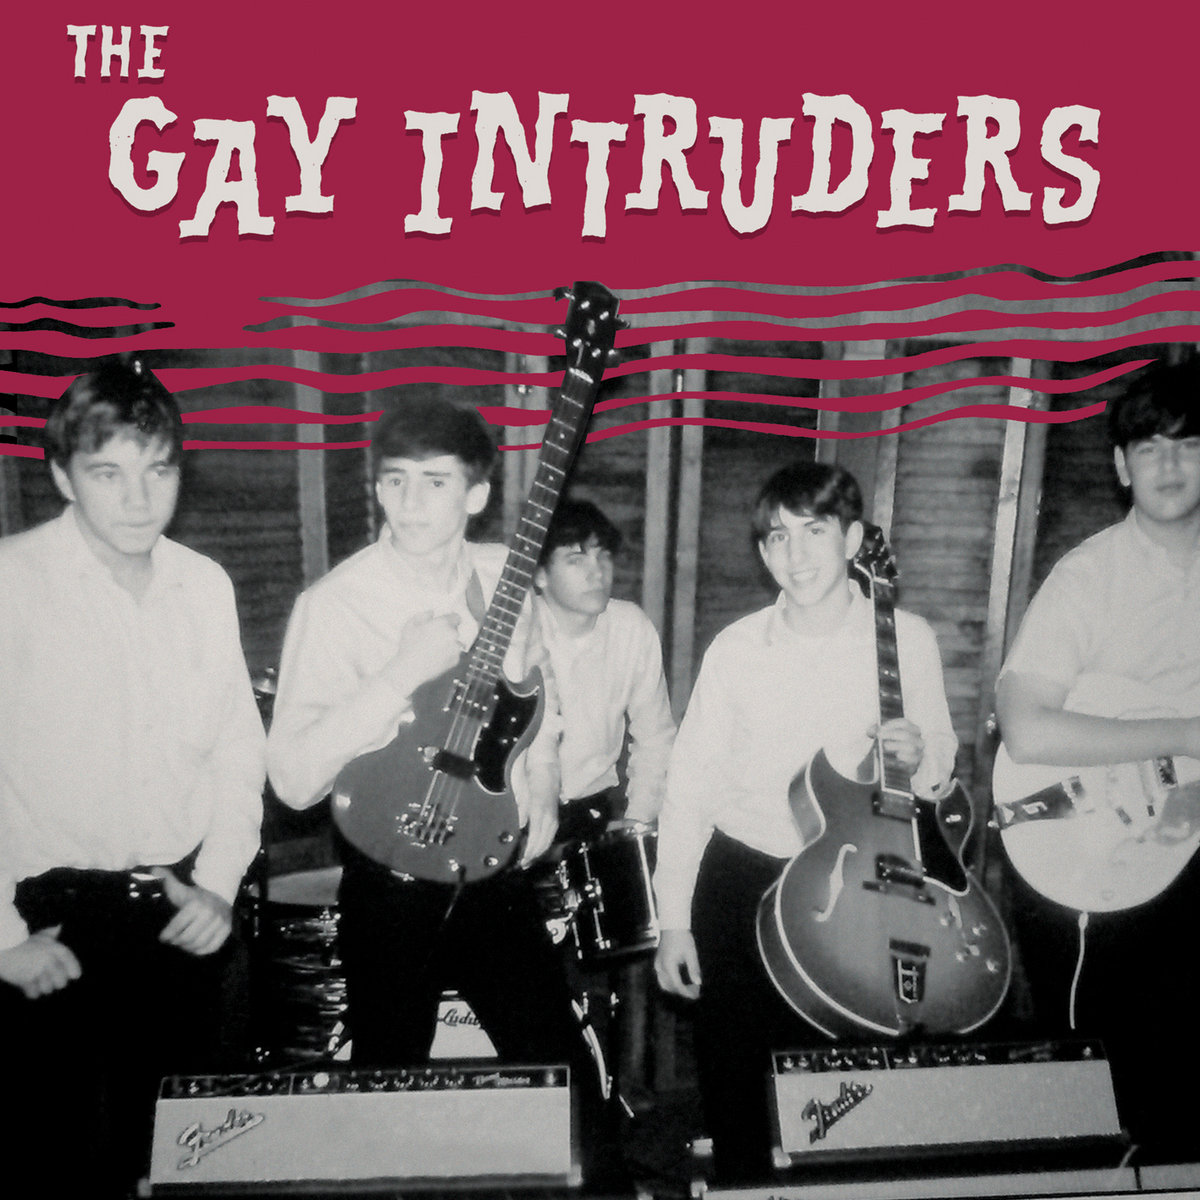 In The Race / It's Not Today, The Gay Intruders